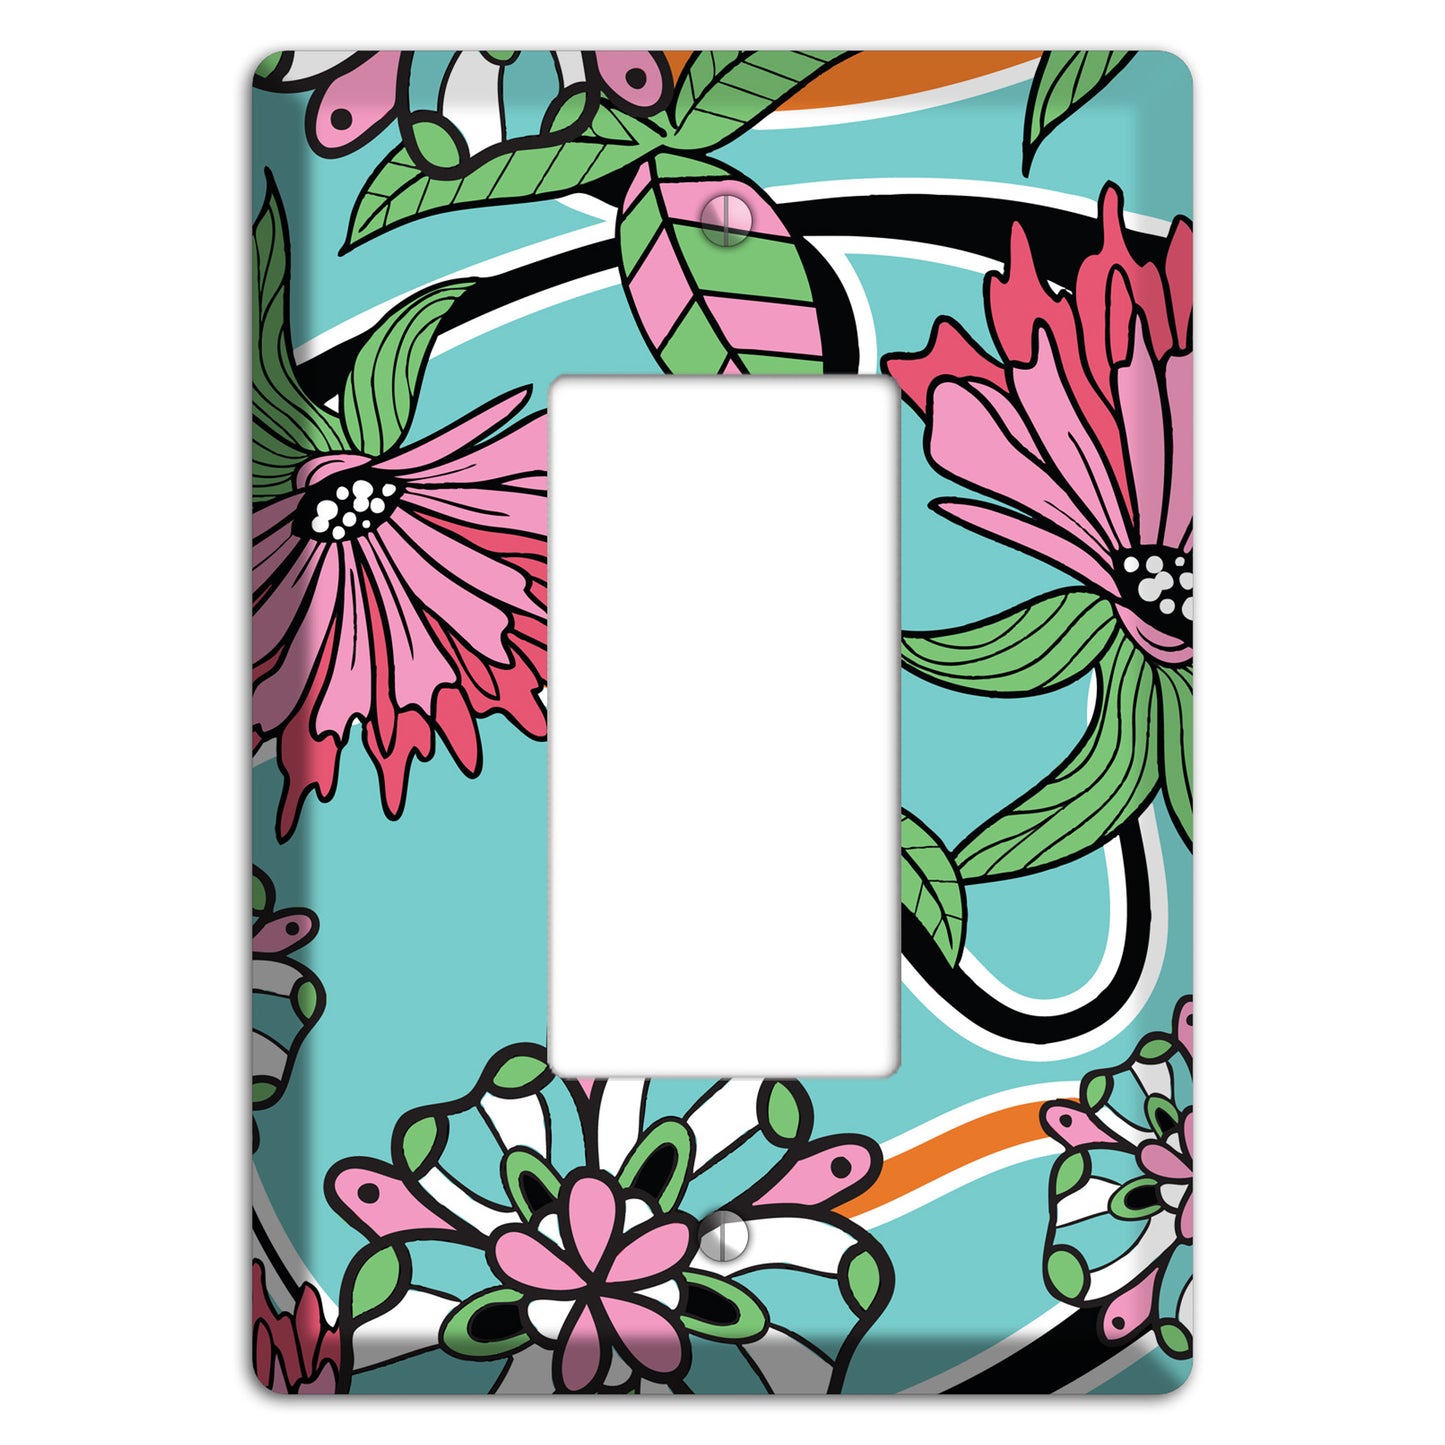 Turquoise with Pink Flowers Rocker Wallplate